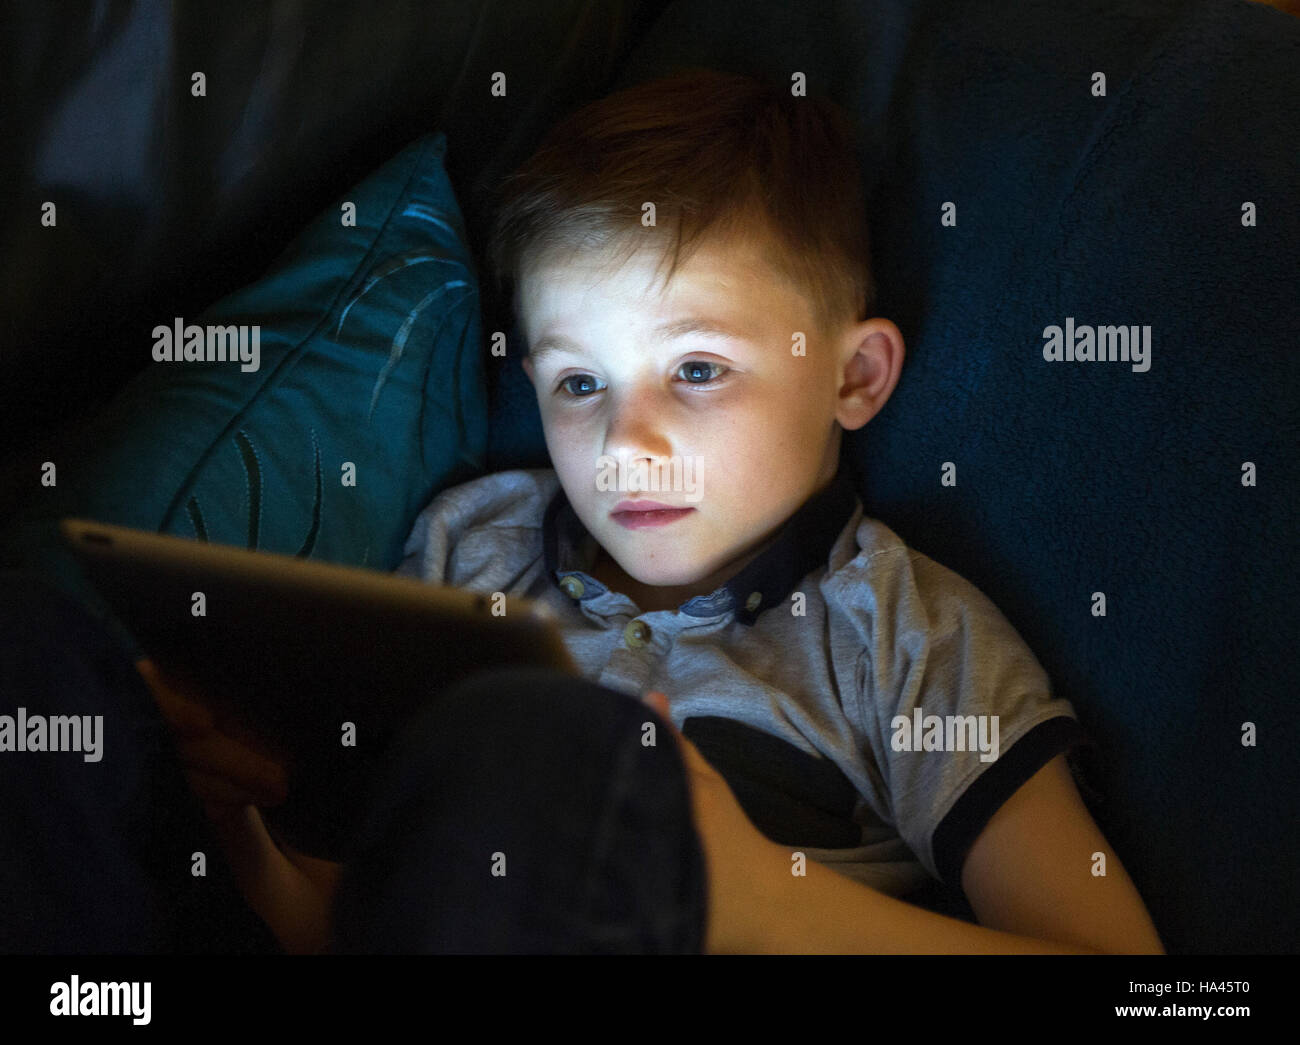 Young boy sitting using Apple ipad to access the internet using wireless technology. Stock Photo